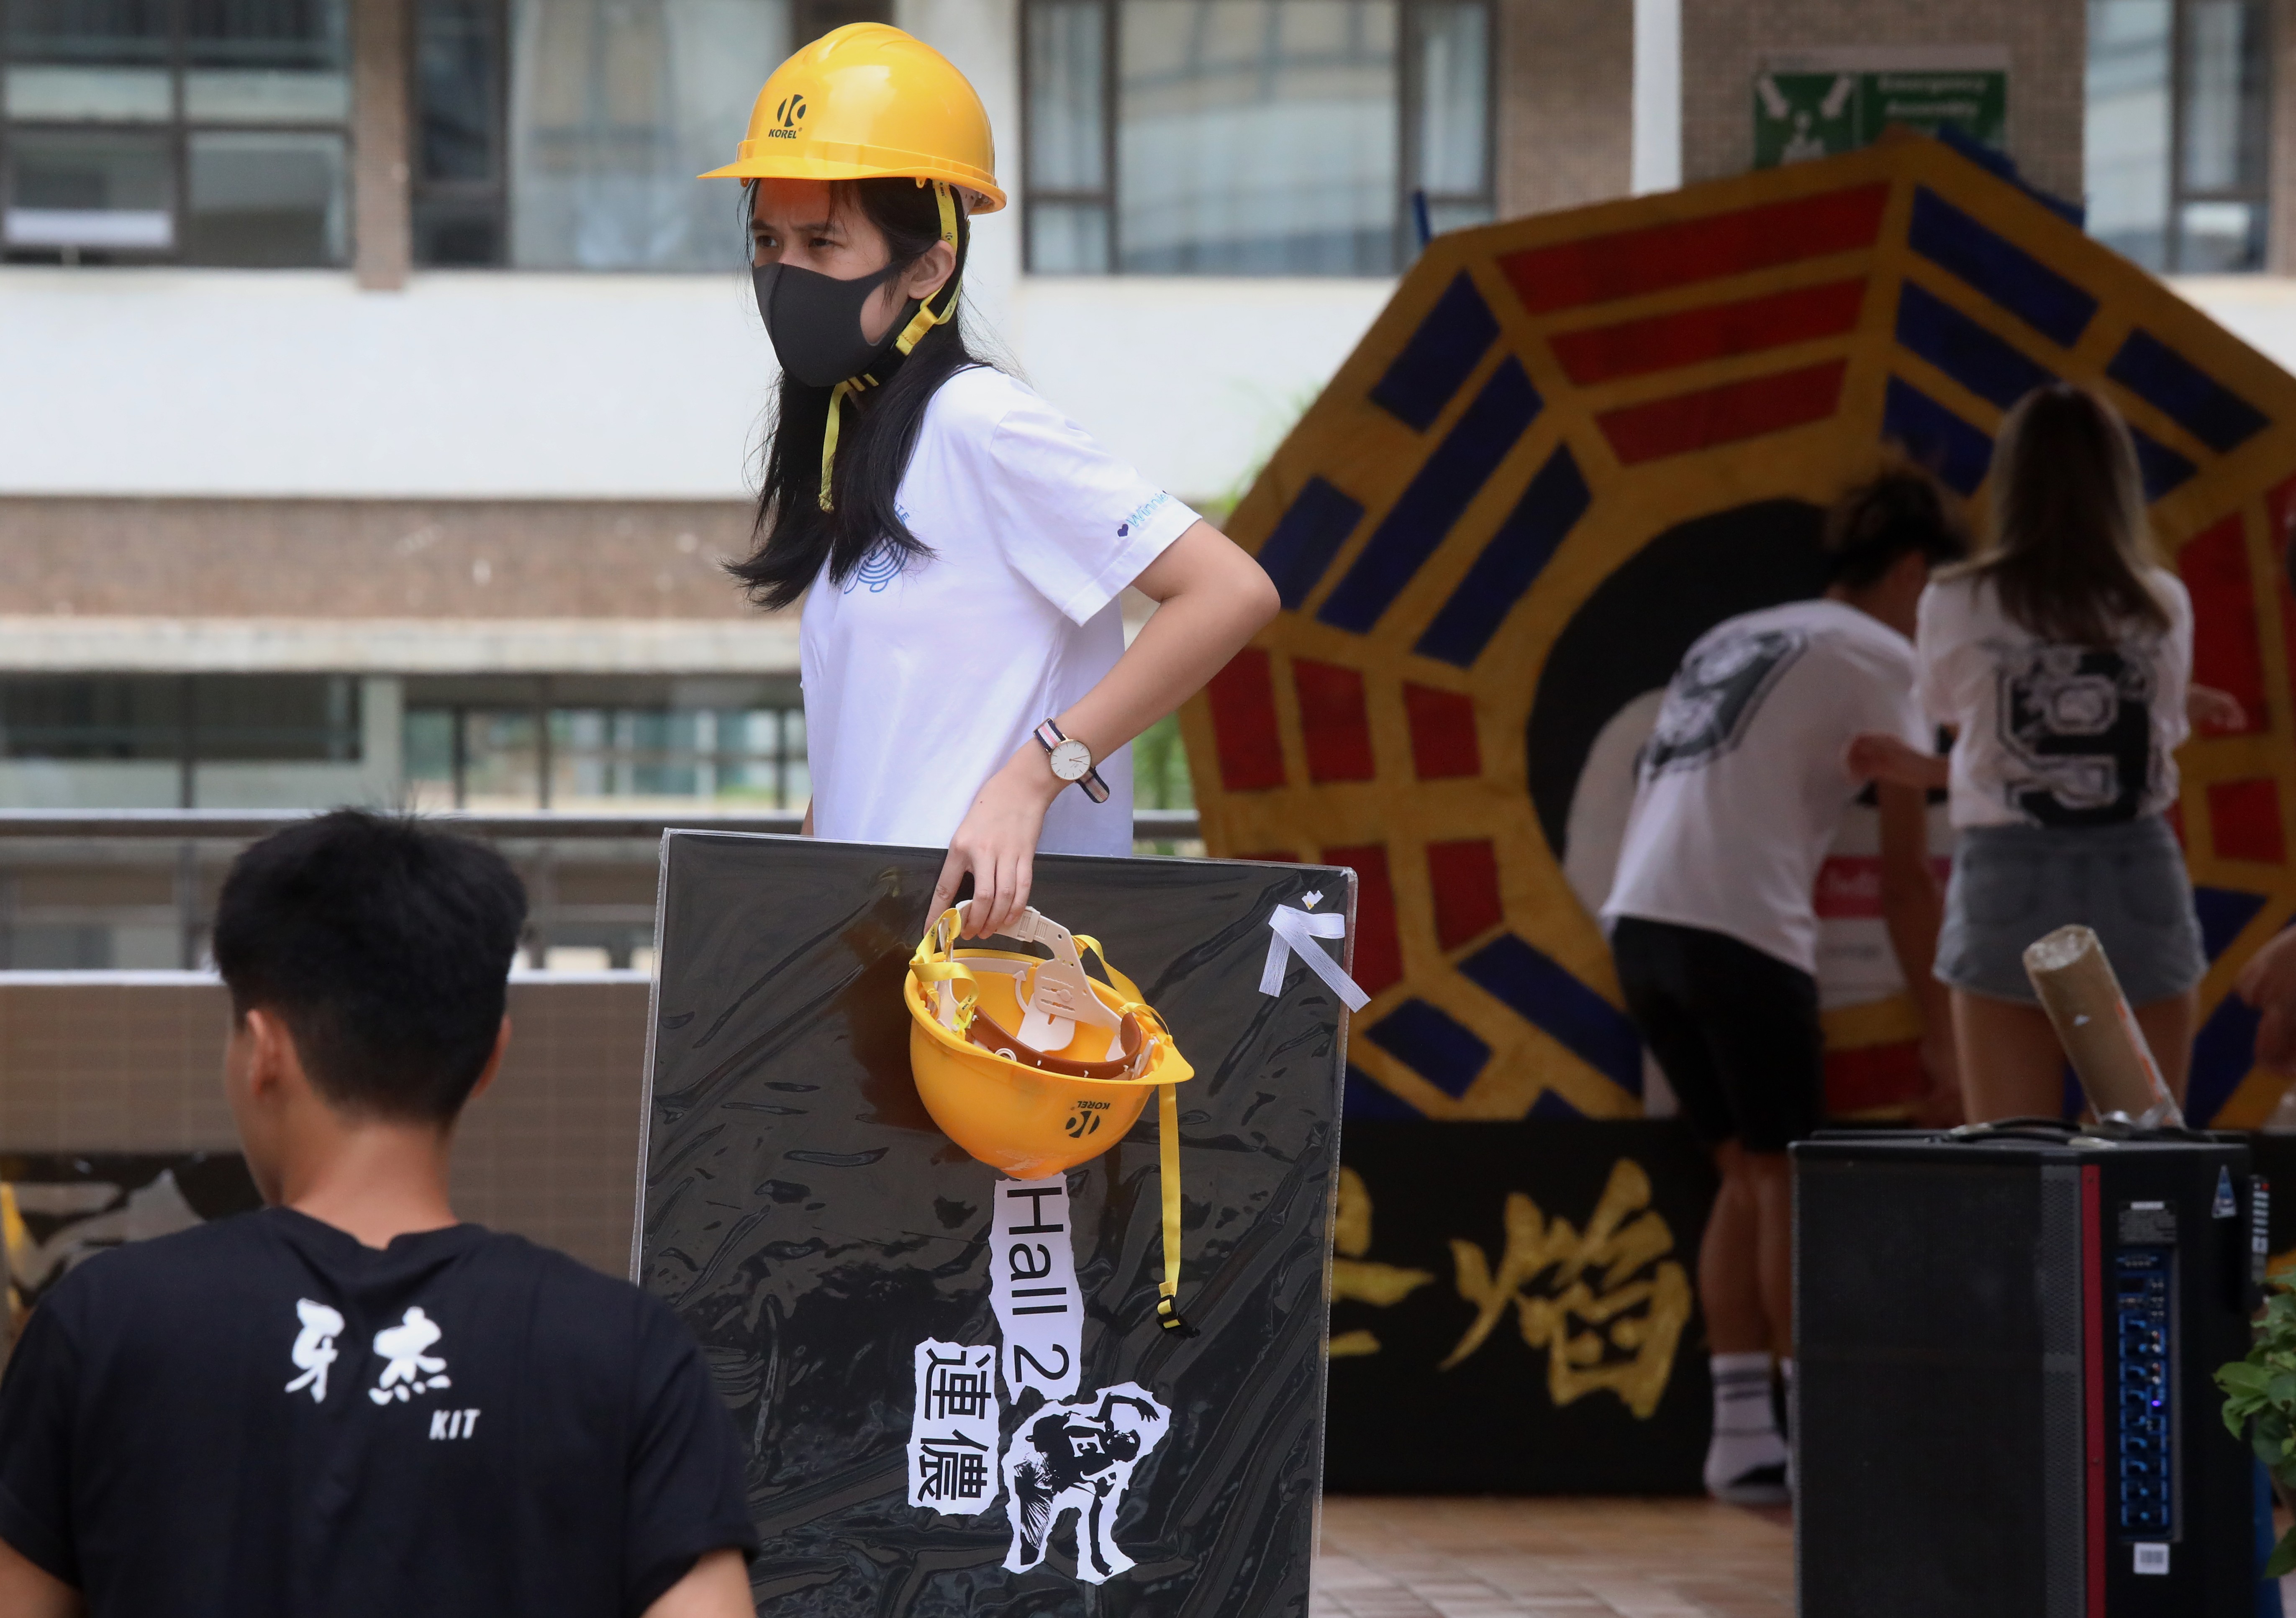 Some students dressed in full protest gear on orientation day at Hang Seng University, Sha Tin on Tuesday. Photo: K.Y. Cheng